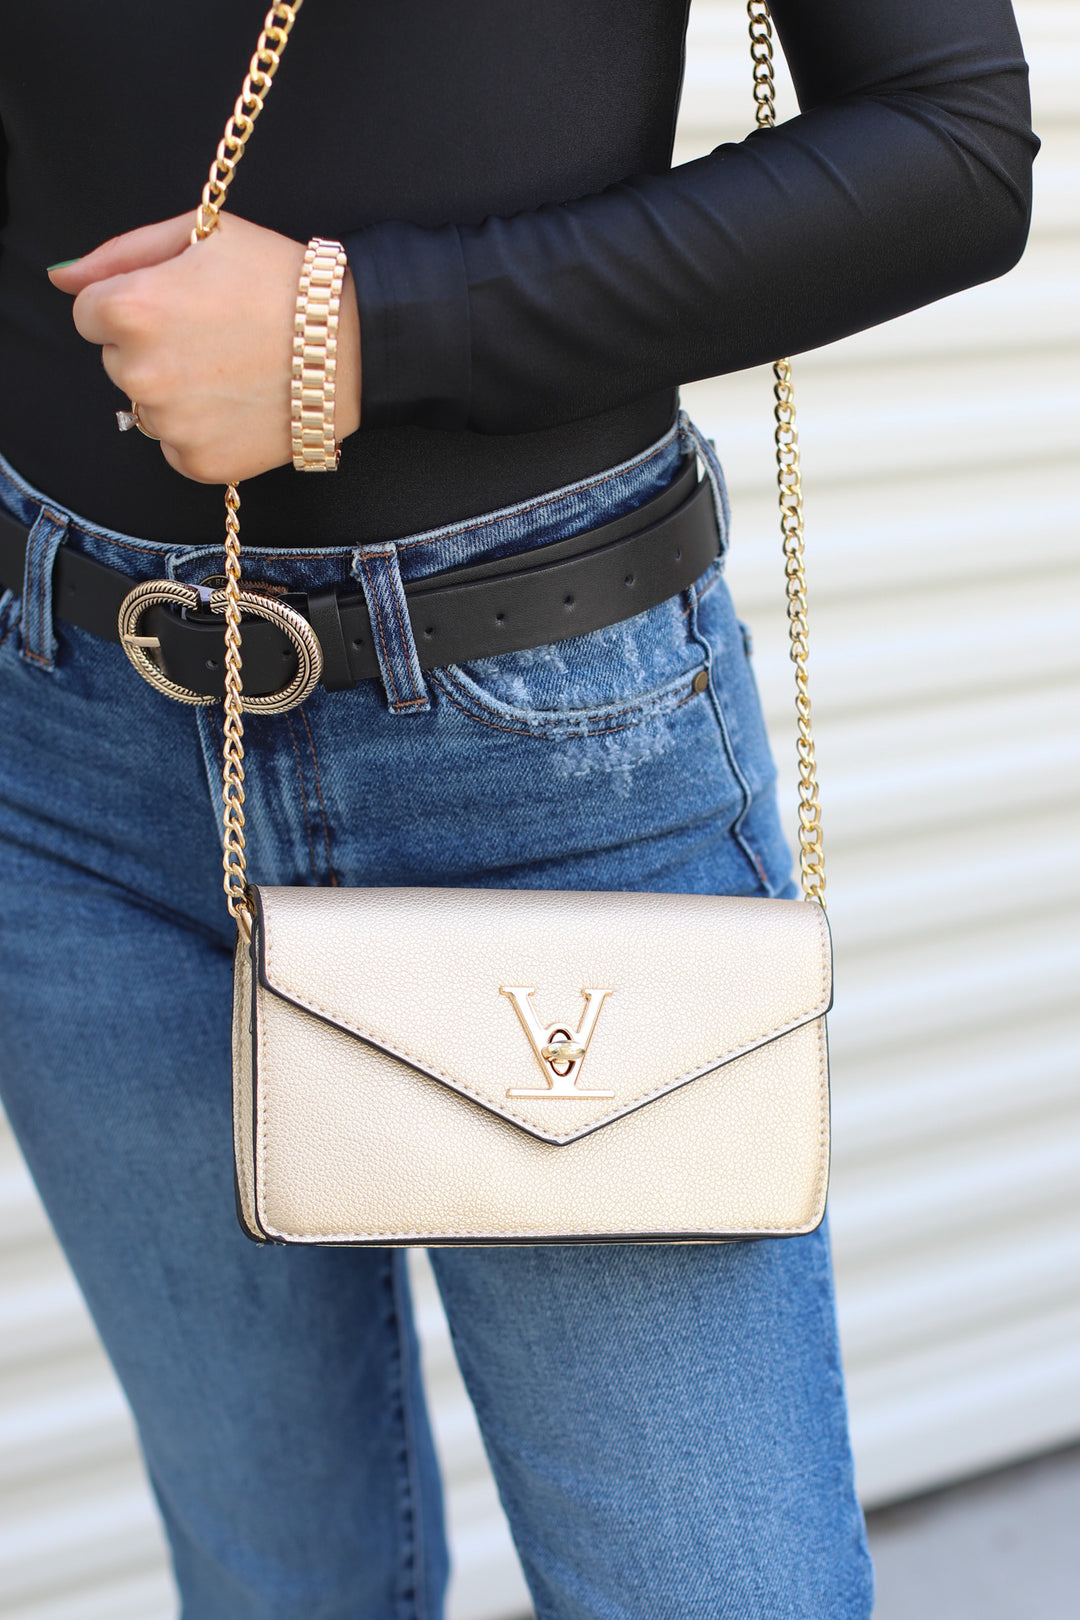 Oh So Classy Purse In Gold - ShopSpoiled